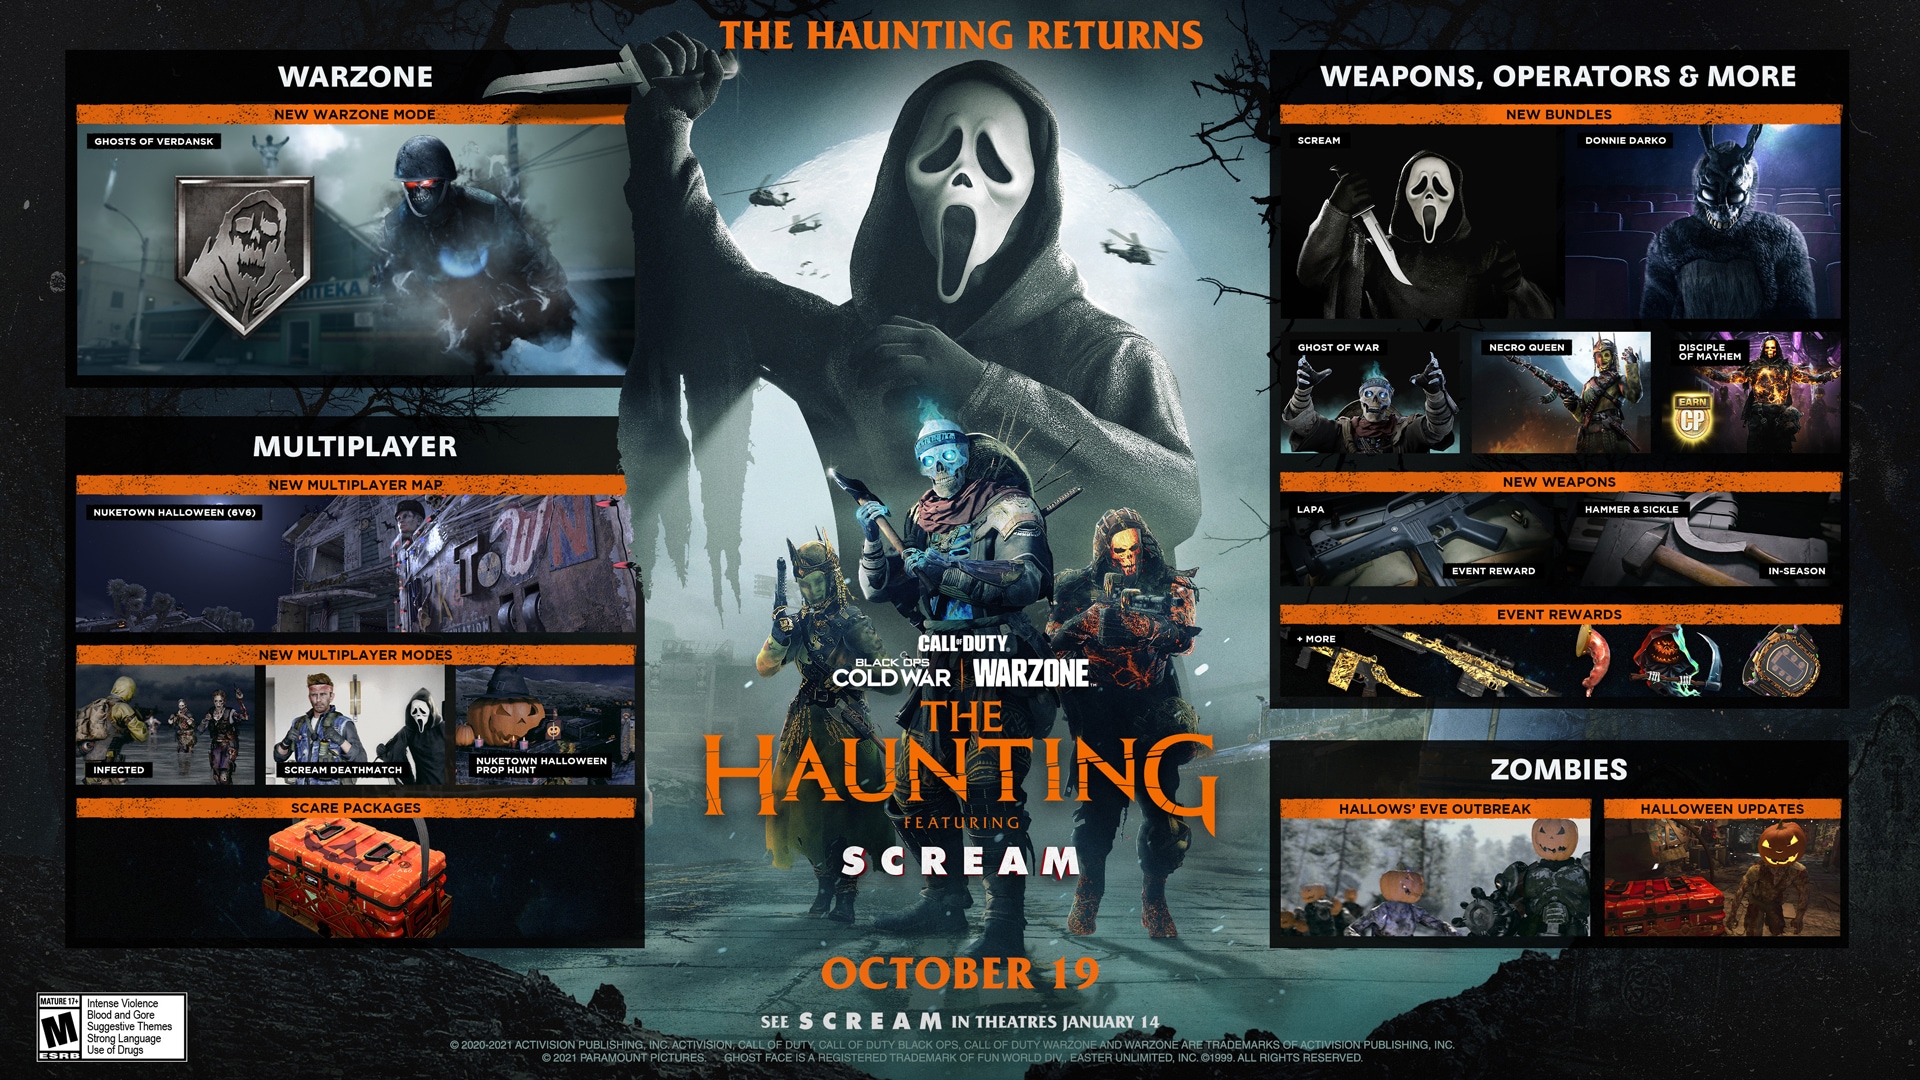 All the goodies that await in The Haunting